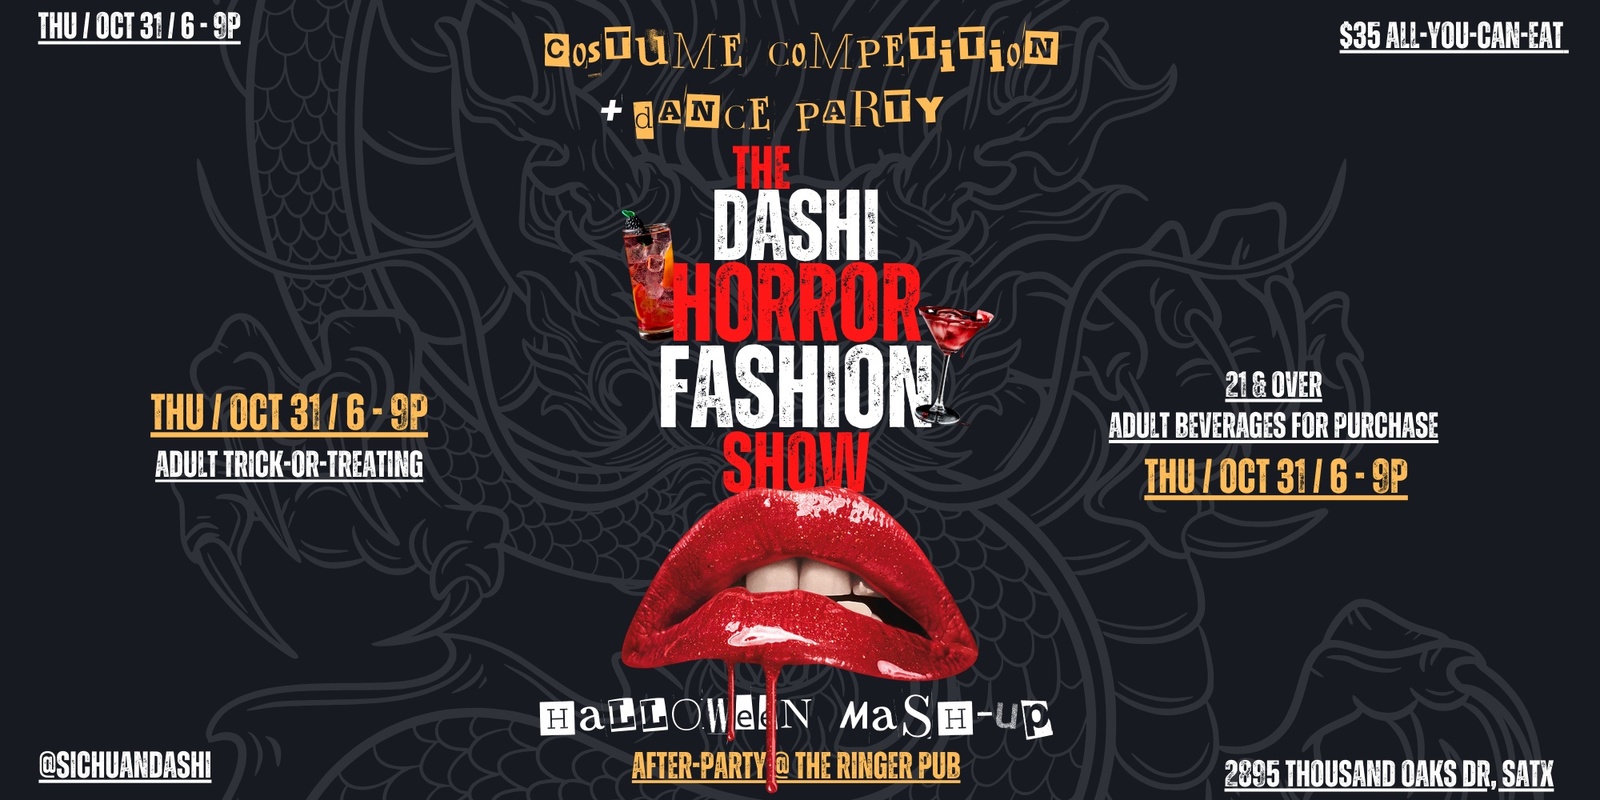 Banner image for 2nd Annual DASHI HORROR FASHION SHOW - A Costume Competition + Monster Mash